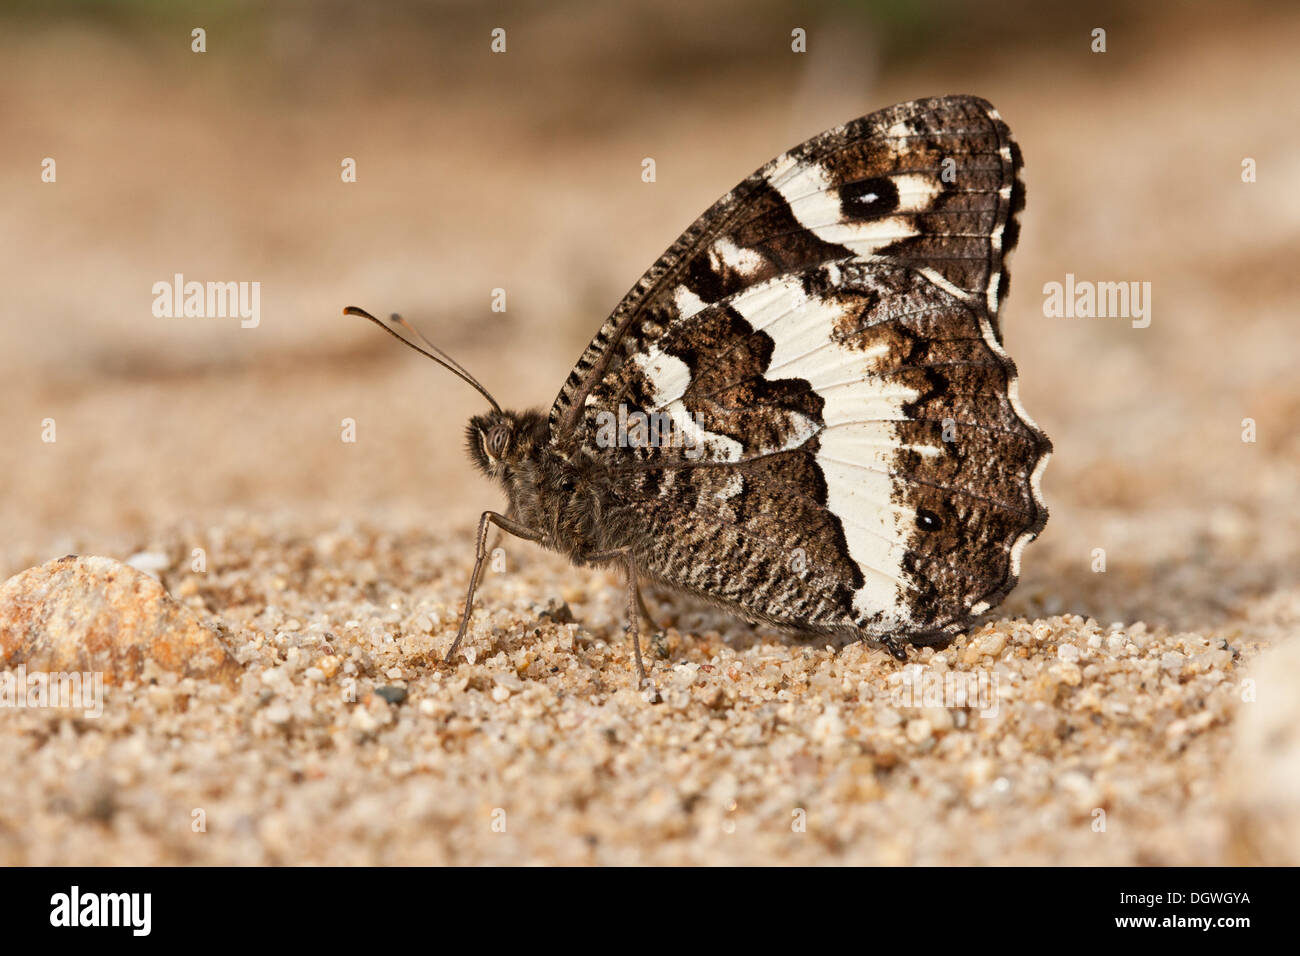 Great Banded Grayling, Brintesia circe perched on sand. Bulgaria Stock Photo